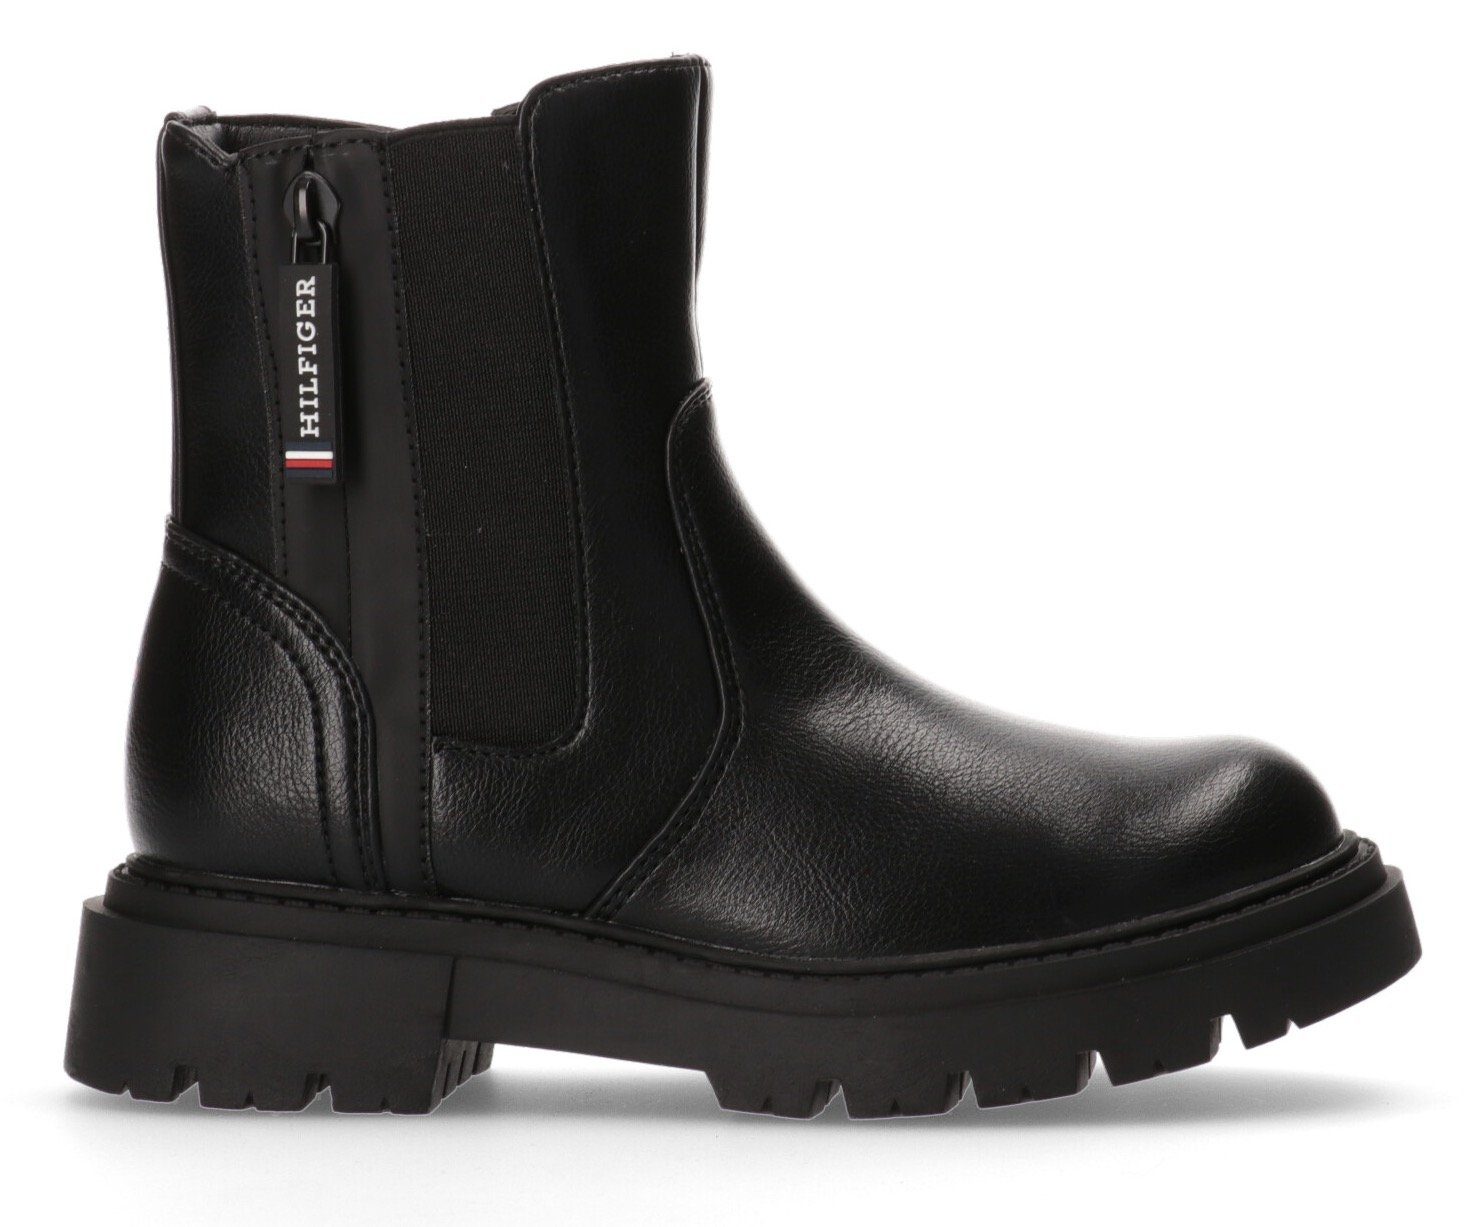 BOOT mit Plateausohle CHELSEA Hilfiger Tommy modischer Chelseaboots